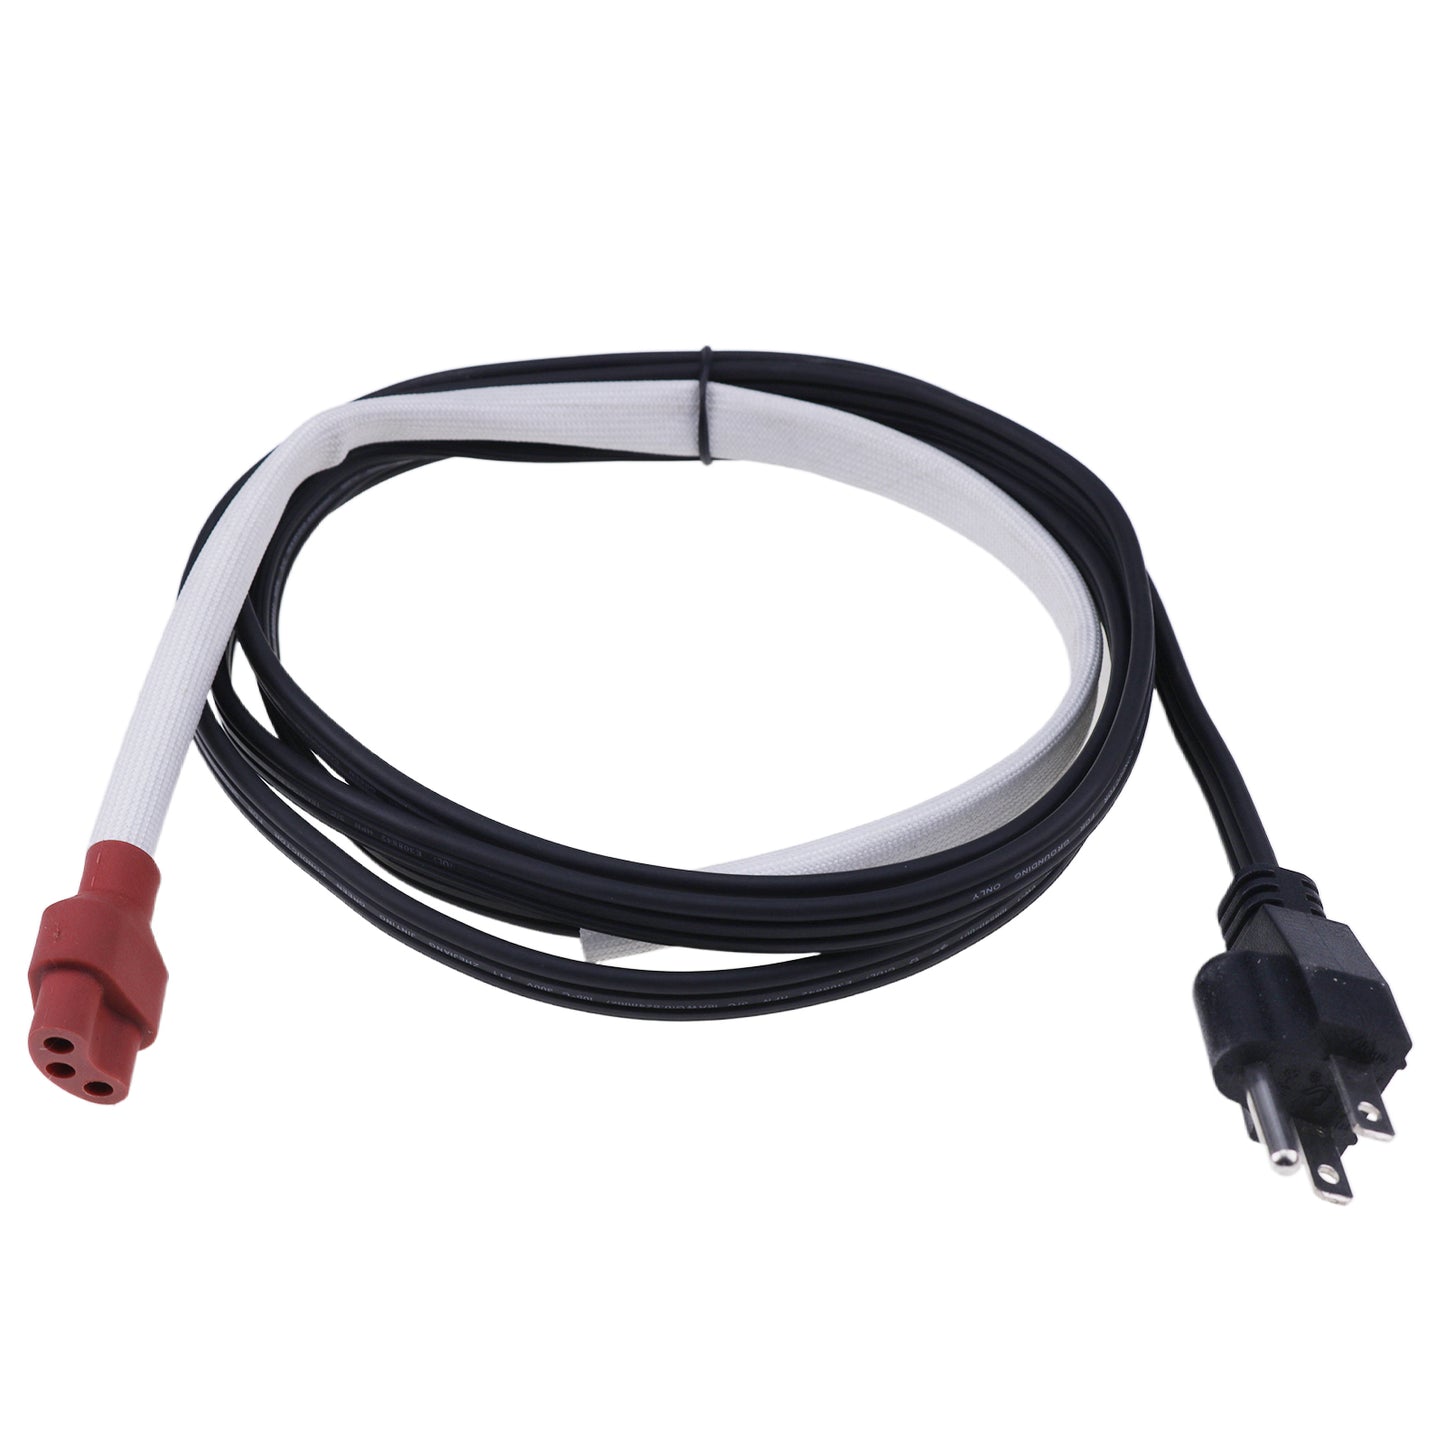 New Block Heater Cord 84303149 19301659 Compatible with 2001-2018 6.6 L Duramax Diesel Engine Chevy GMC 2500 3500